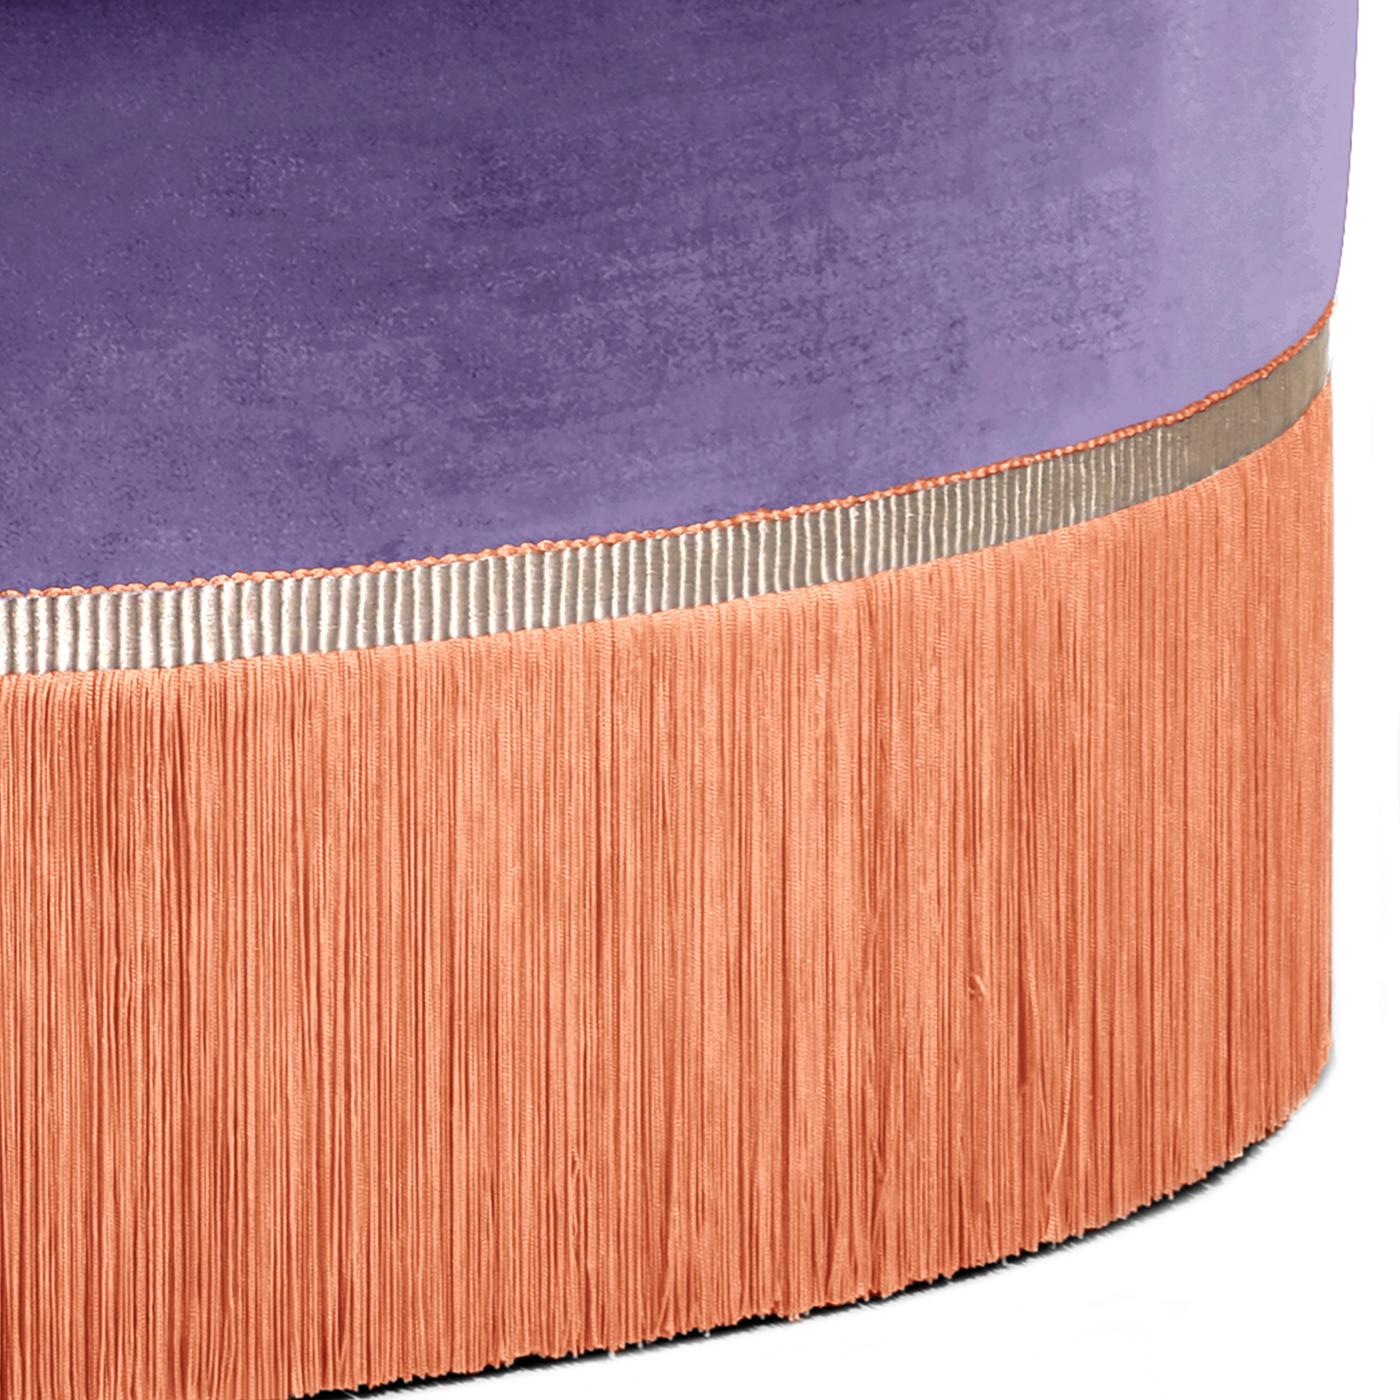 Bold and regal, this pouf from the Couture Geometric Collection doubles as a coffee table. Upholstered in purple velvet 100% trevira and accented with rich orange viscose fringe, the pouf offers rich jewel tones and supple textures. Whether used as